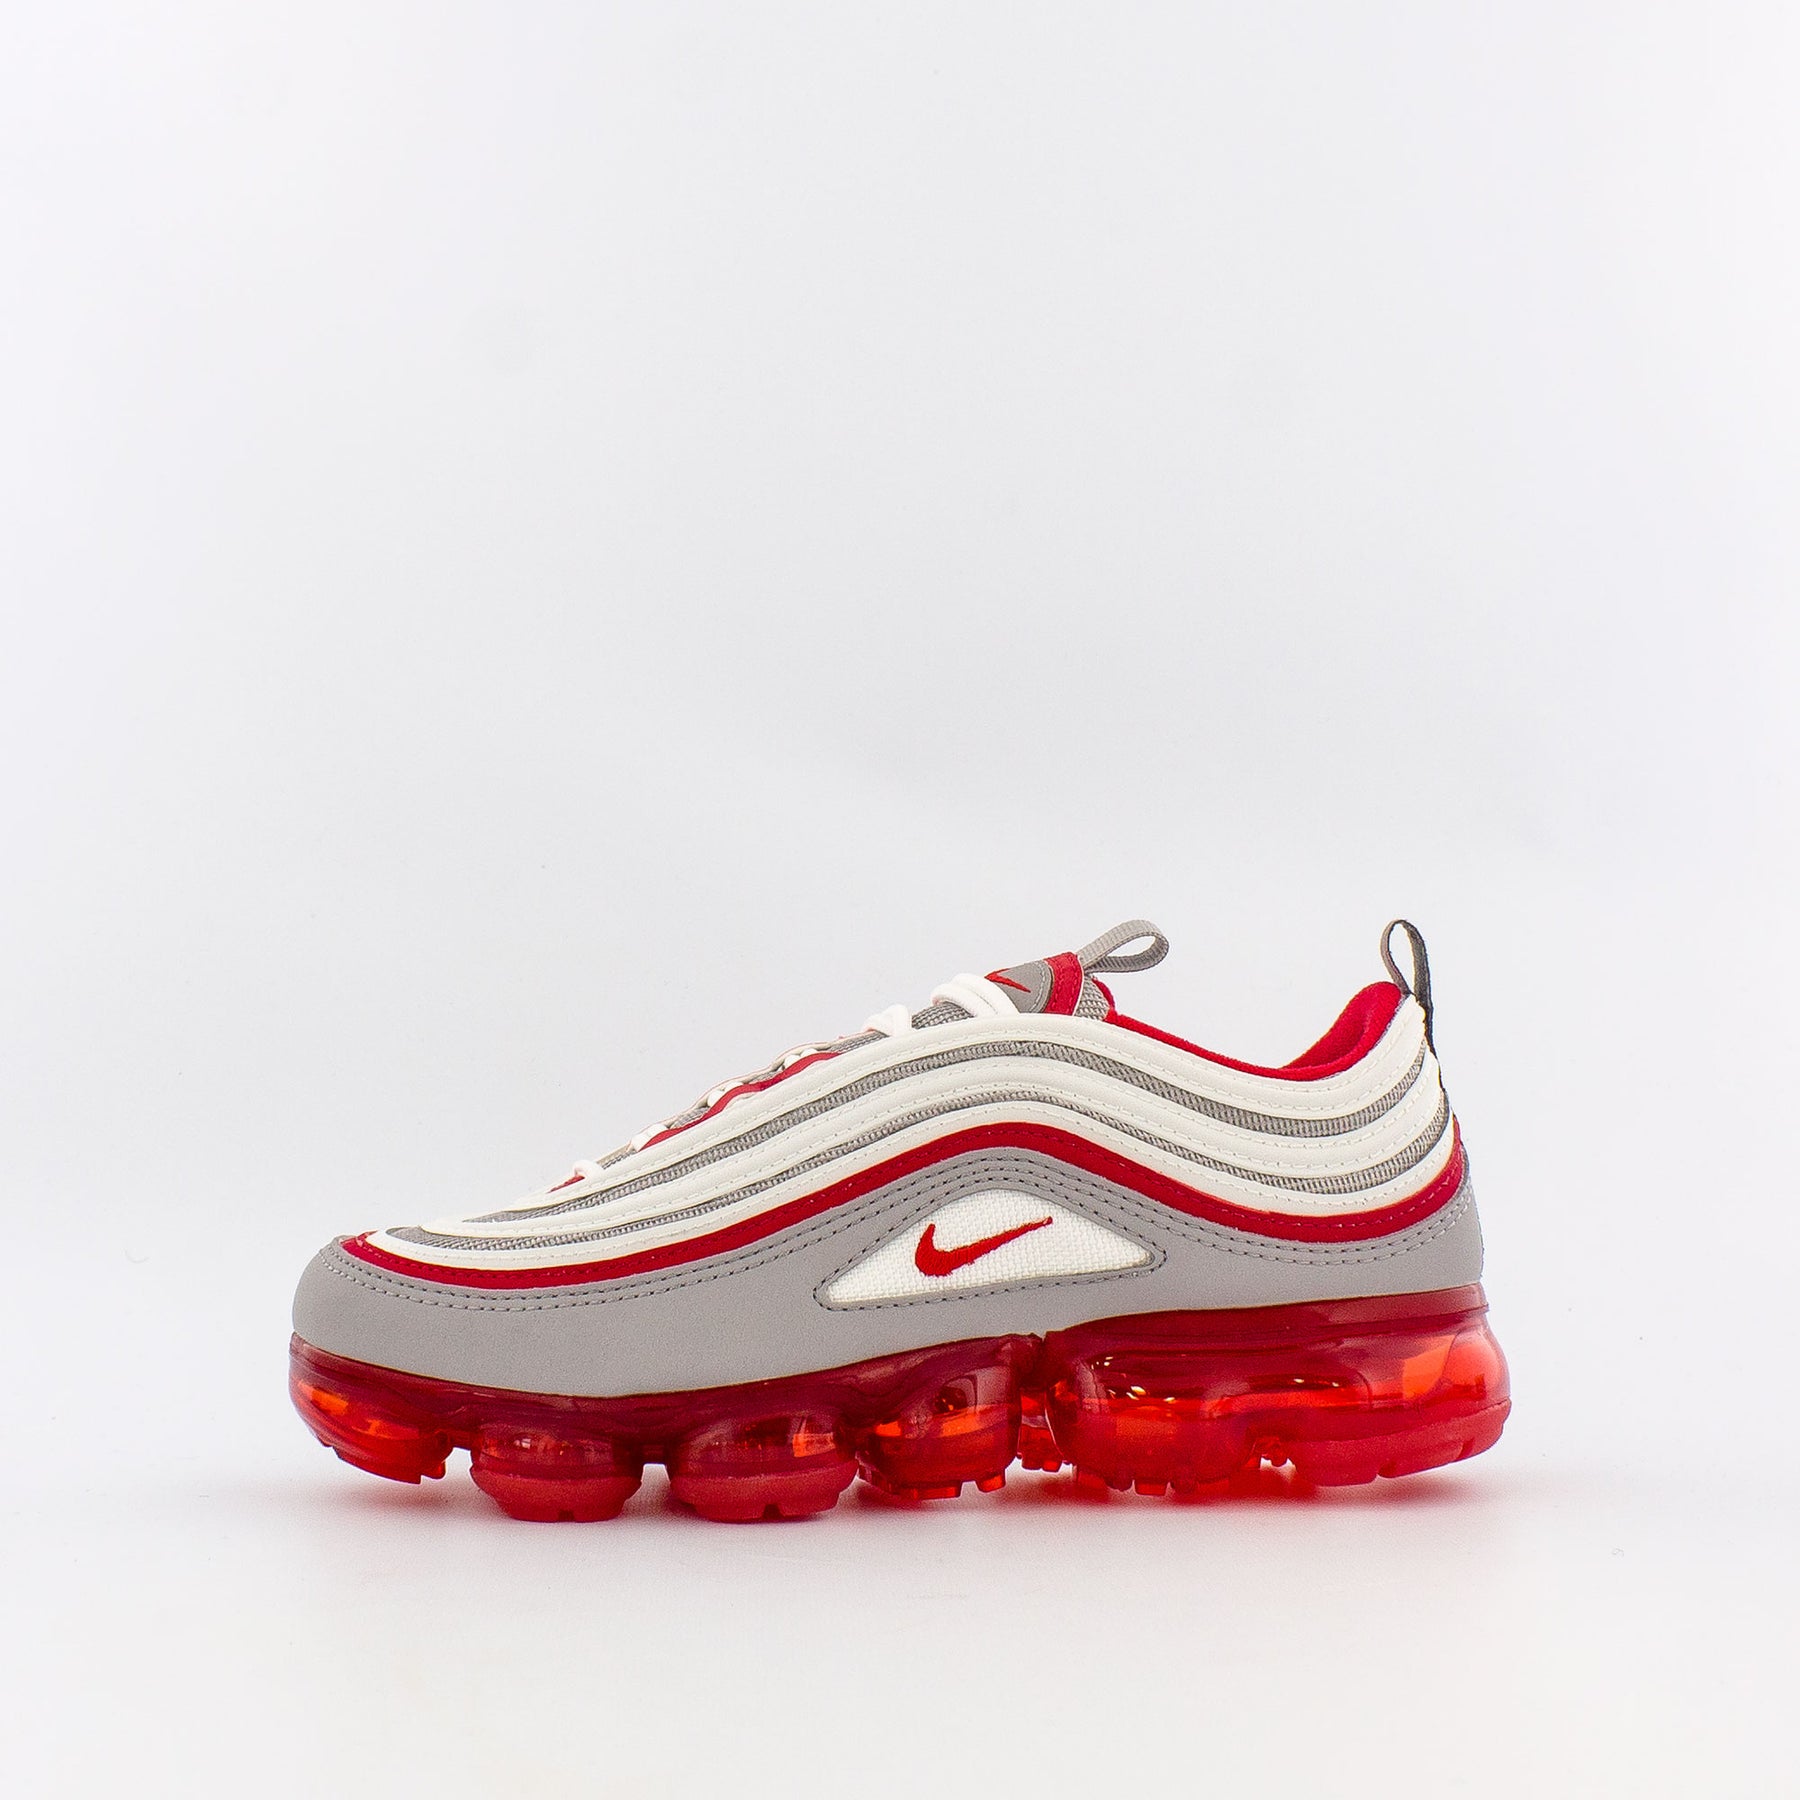 vapormax 97 white red